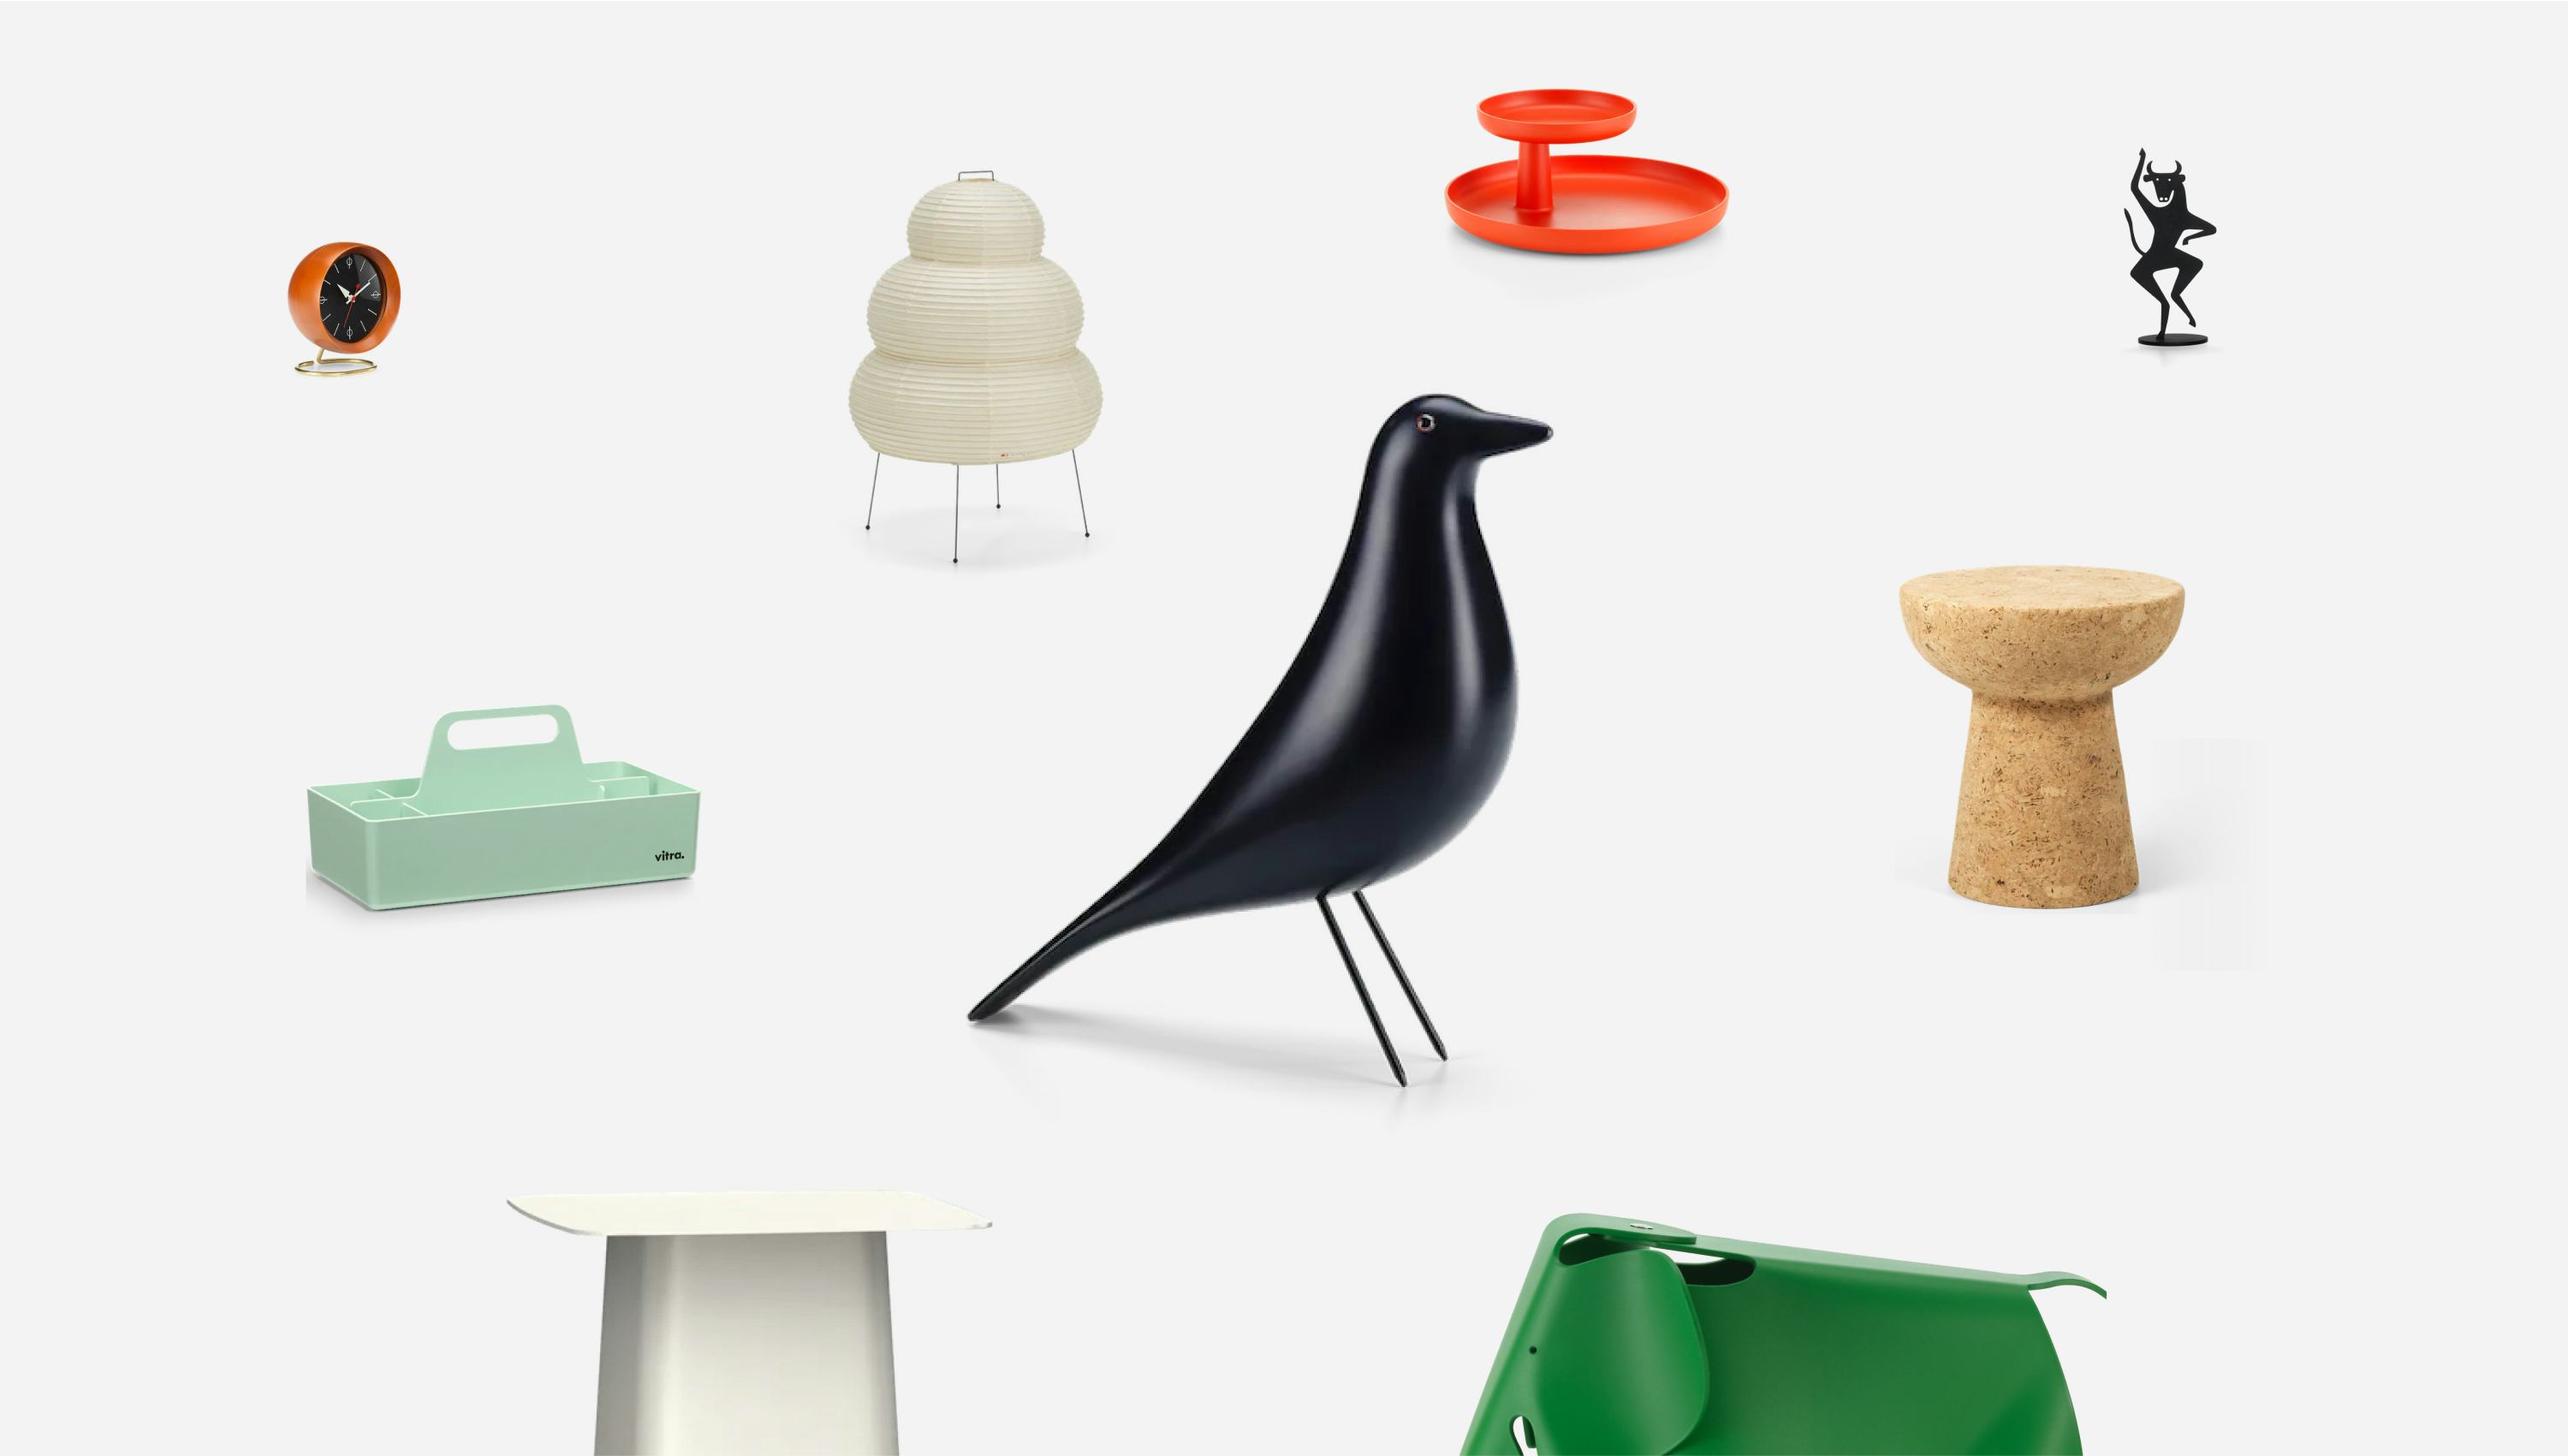 Objects and gifts from the Vitra Gift Finder website. There is a wooden bird in the middle, surrounded by a cork stool, an elephant, sculptures, a clock and a small table.